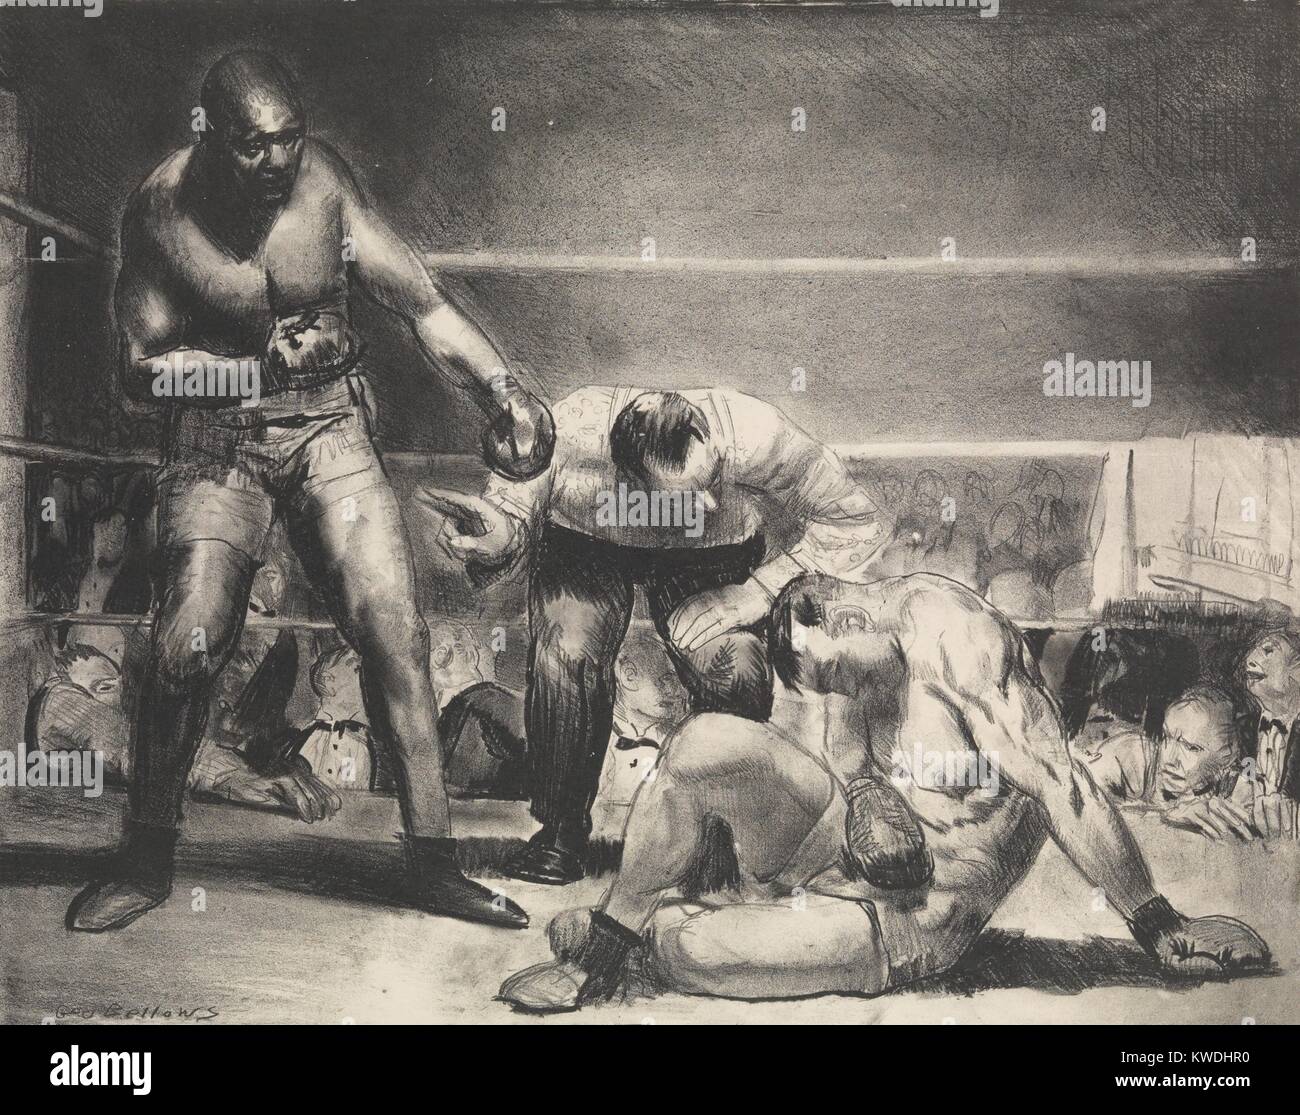 THE WHITE HOPE, by George Bellows, 1921, American print, lithograph. Scene based on African American Jack Johnson, World Heavyweight Champion whose White Hope opponent is knocked down as the referee counts (BSLOC 2017 7 131) Stock Photo